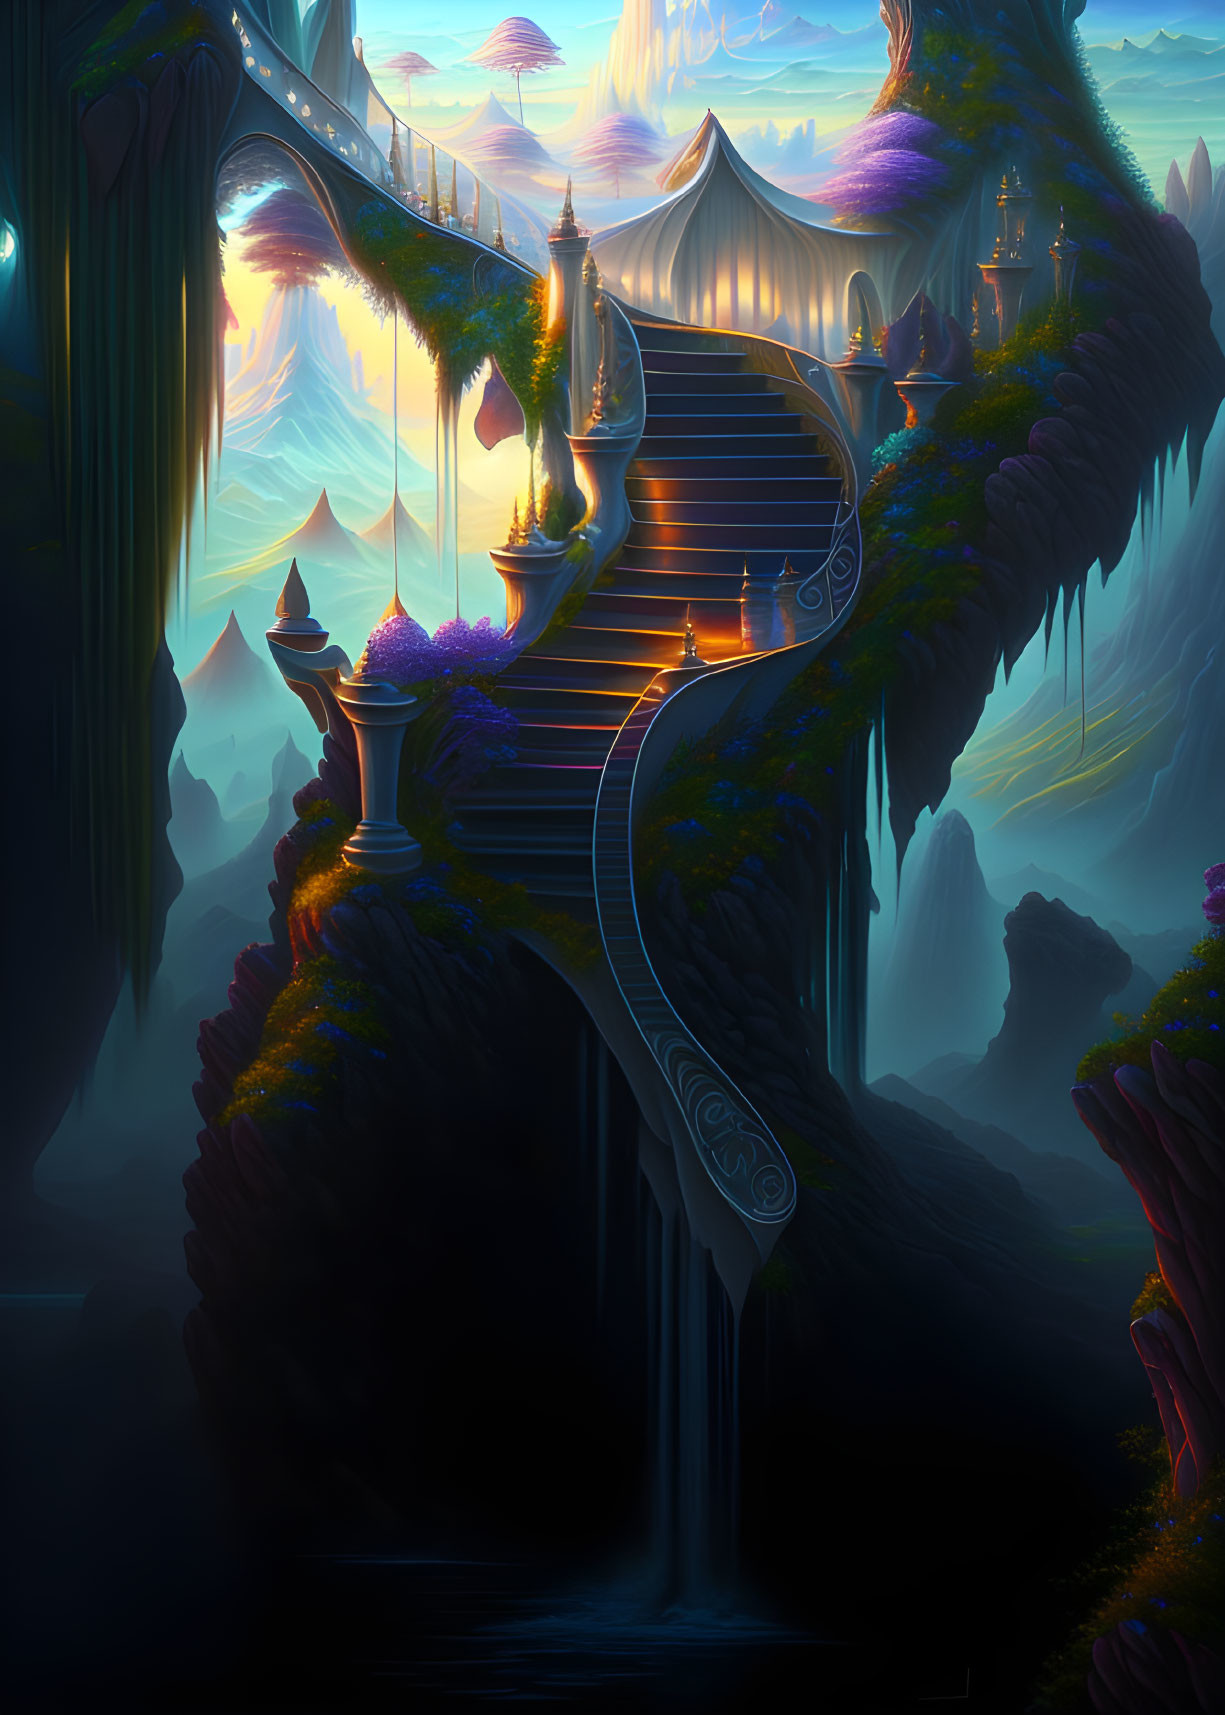 Fantastical twilight landscape with winding staircase, waterfalls, lanterns, vibrant flora, floating islands